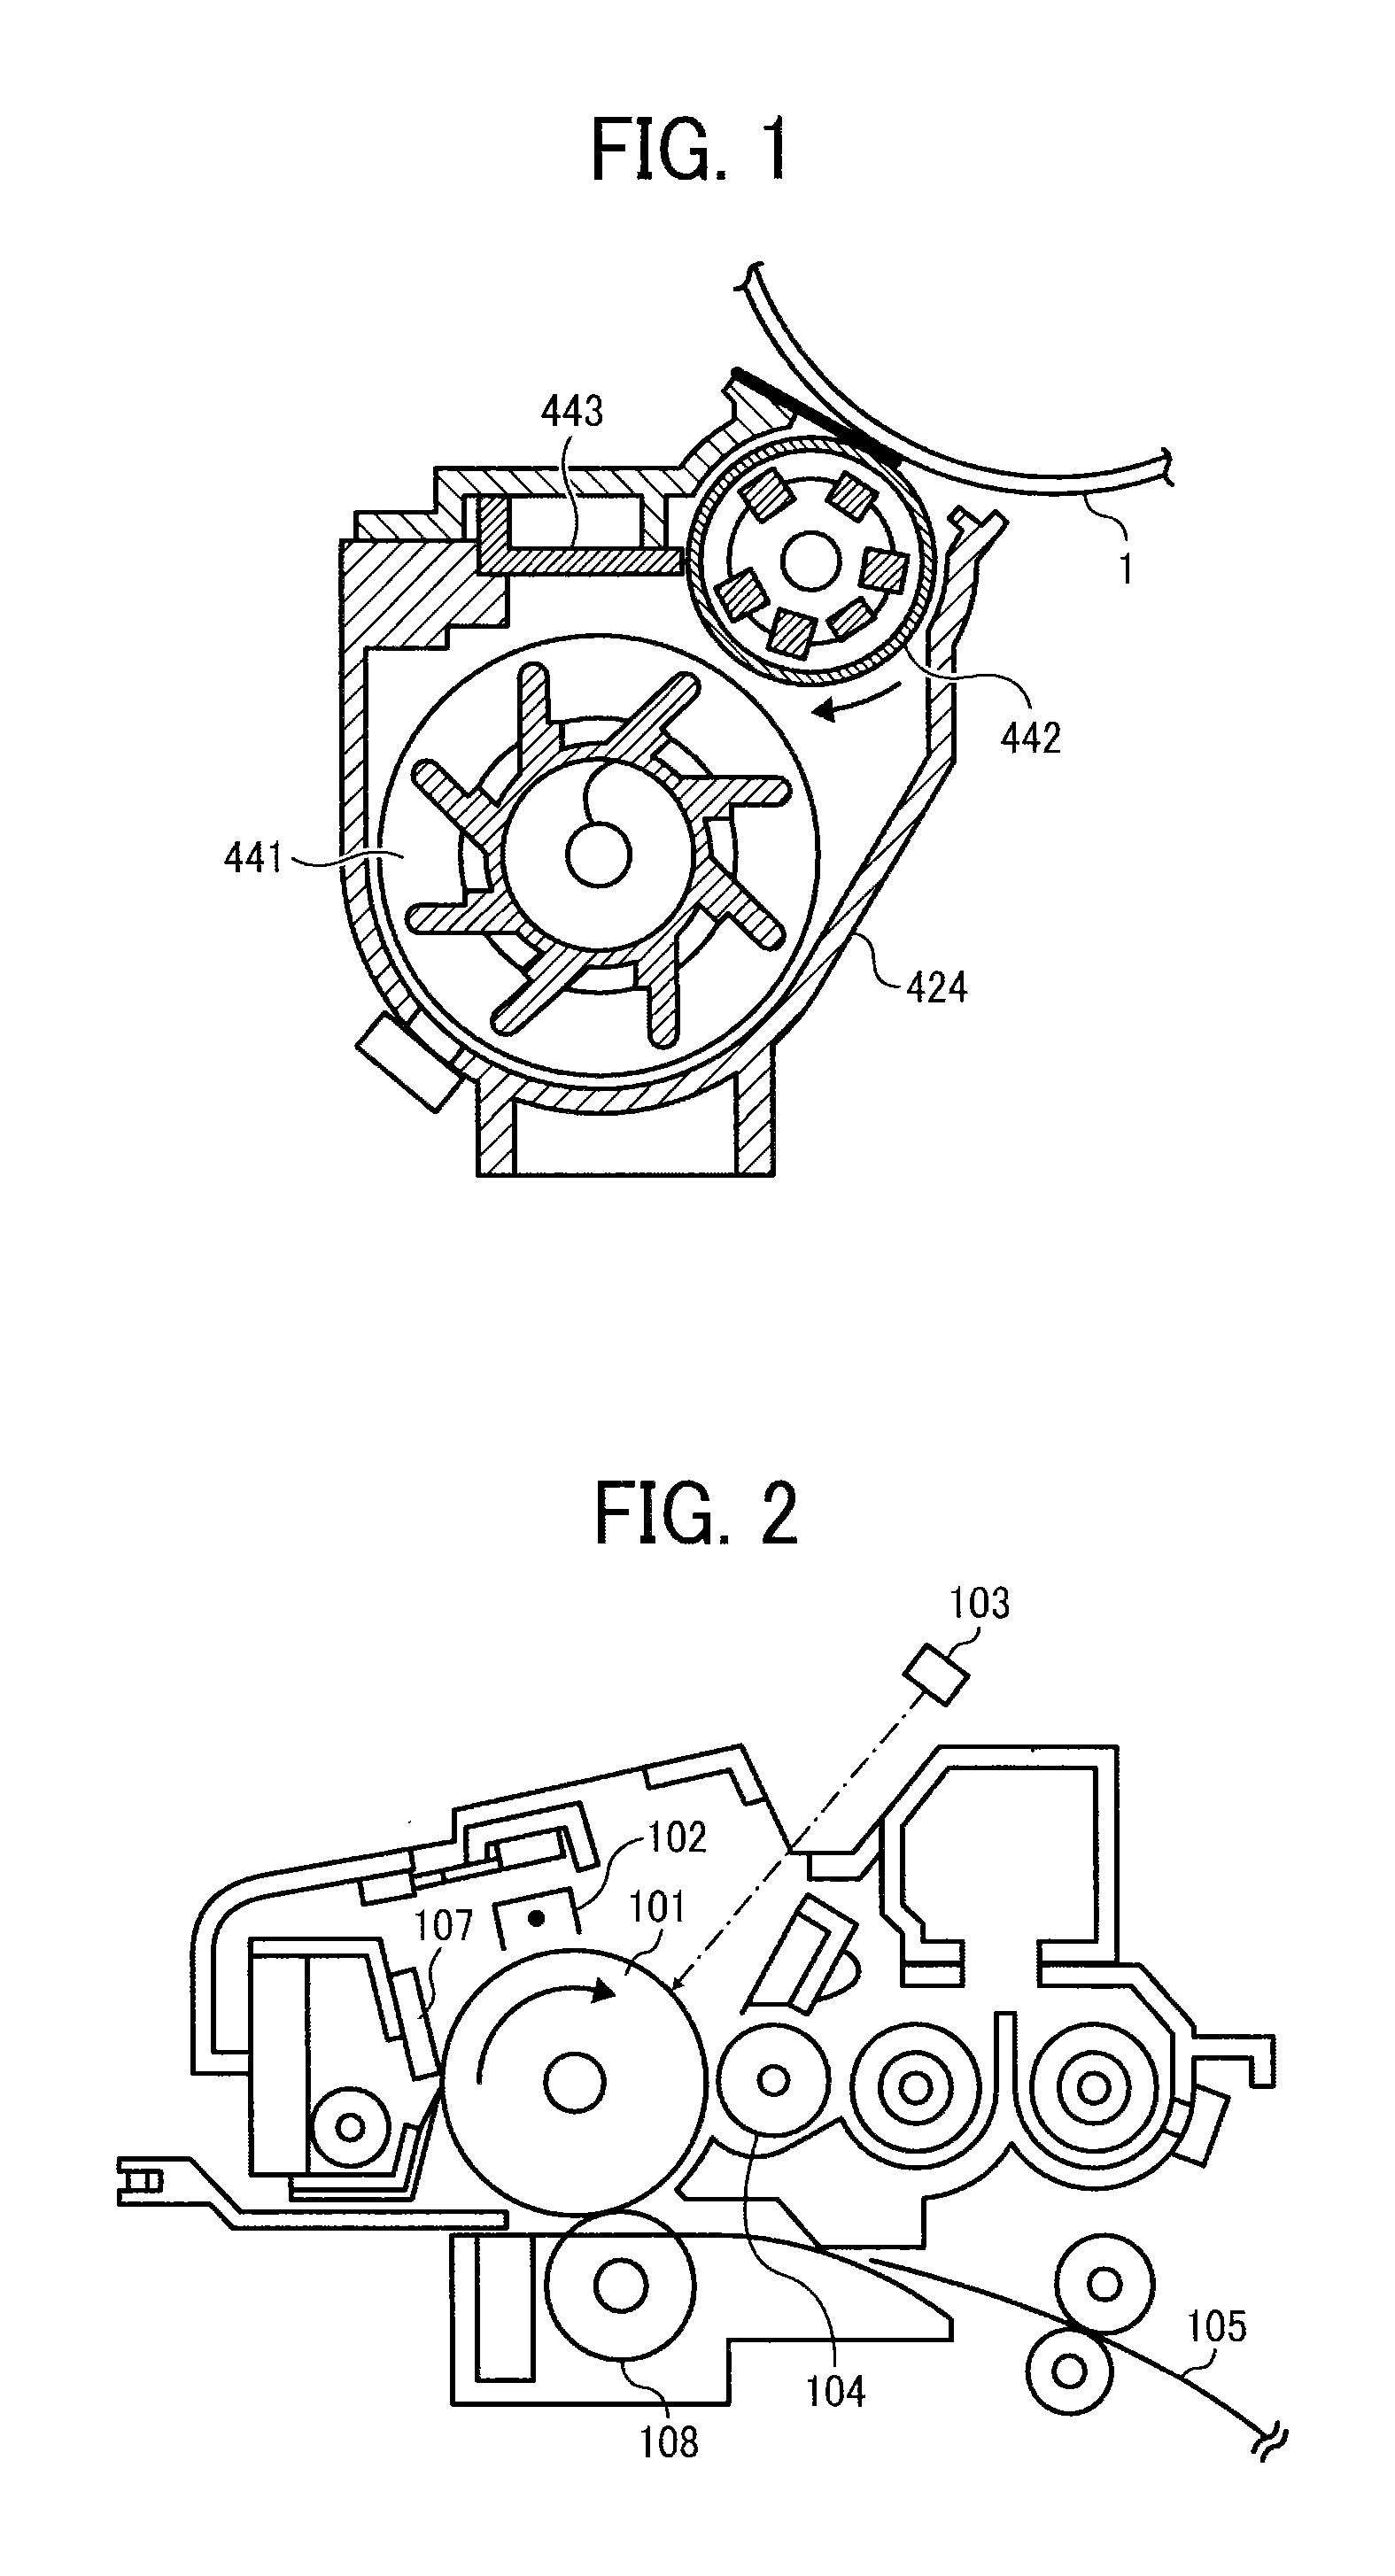 Toner, and developer and image forming apparatus using the toner